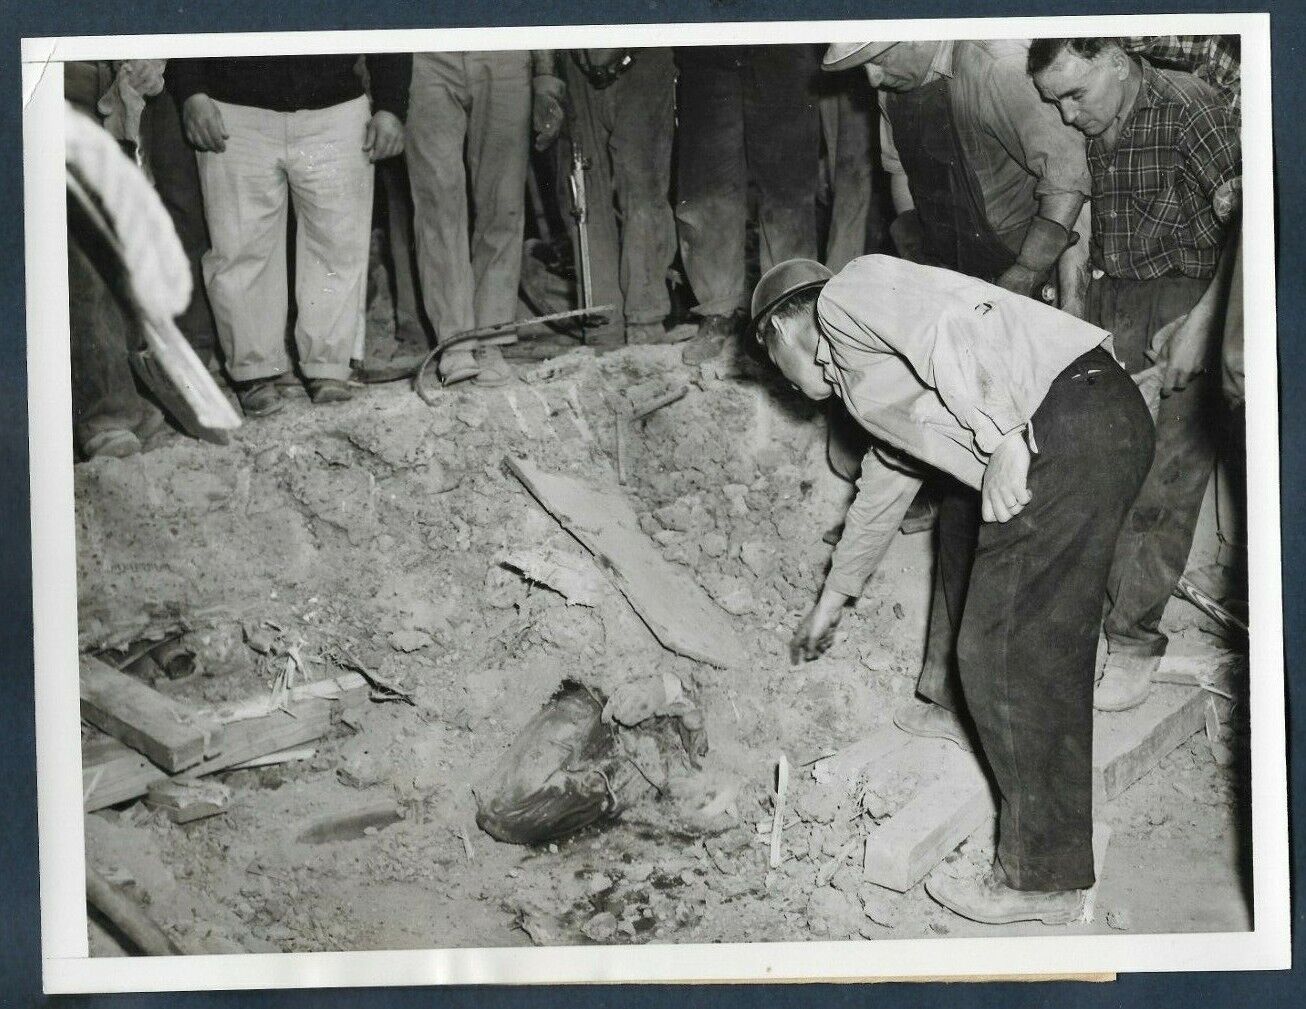 DRAMA ENTOMBED WORKER IN CONCRETE AT NEW YORK COLISEUM 1955 VTG Press Photo Y64